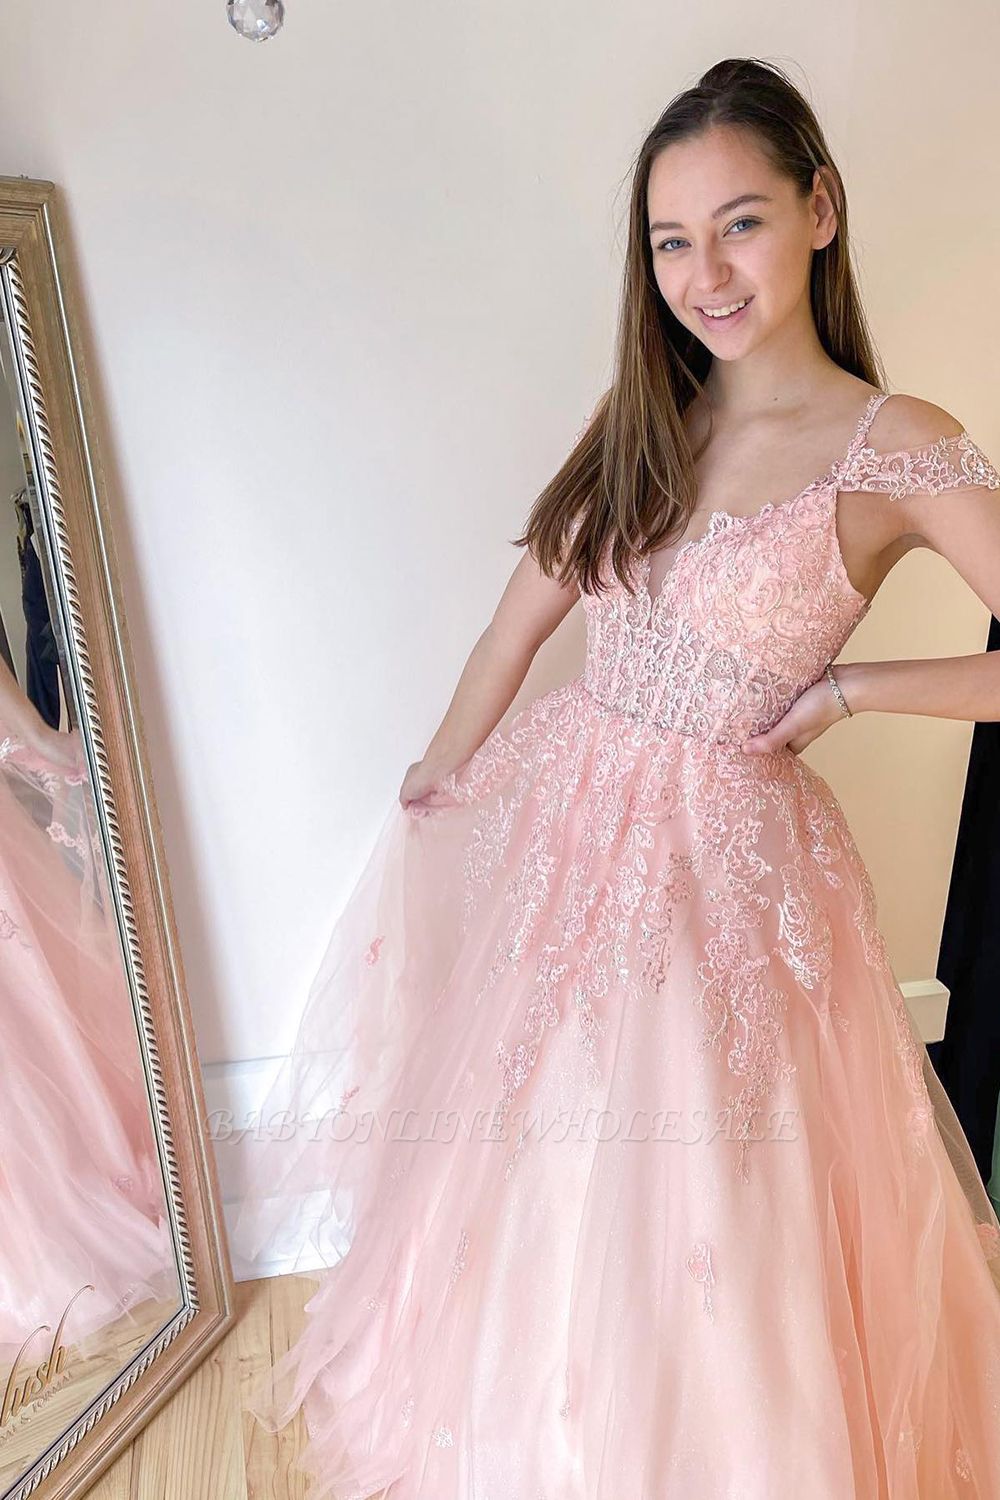 A-line Off-the-shoulder Sweetheart Spaghetti Straps Tulle Prom Dress With Floral Lace